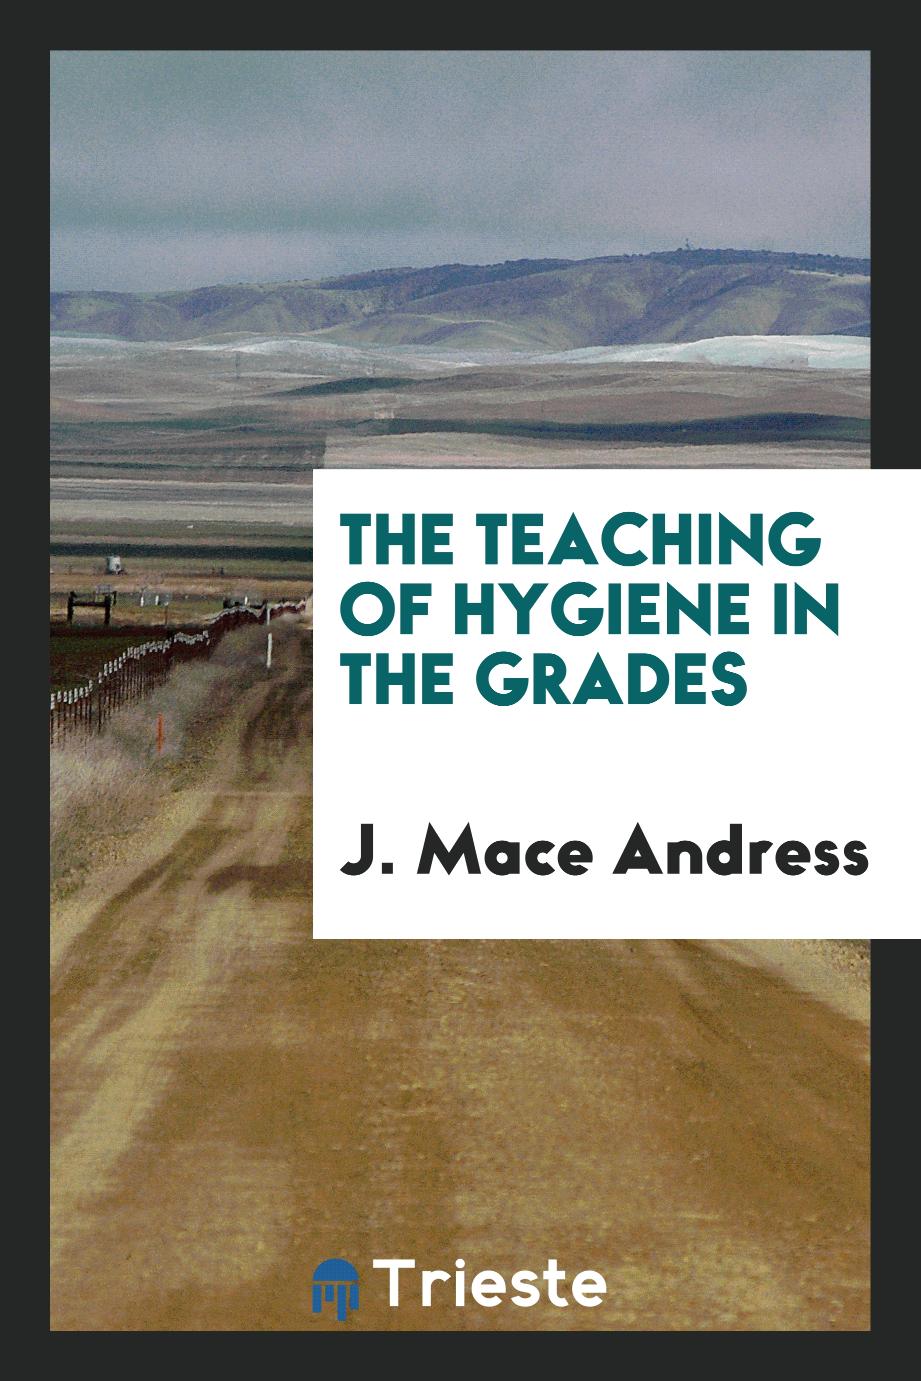 The teaching of hygiene in the grades